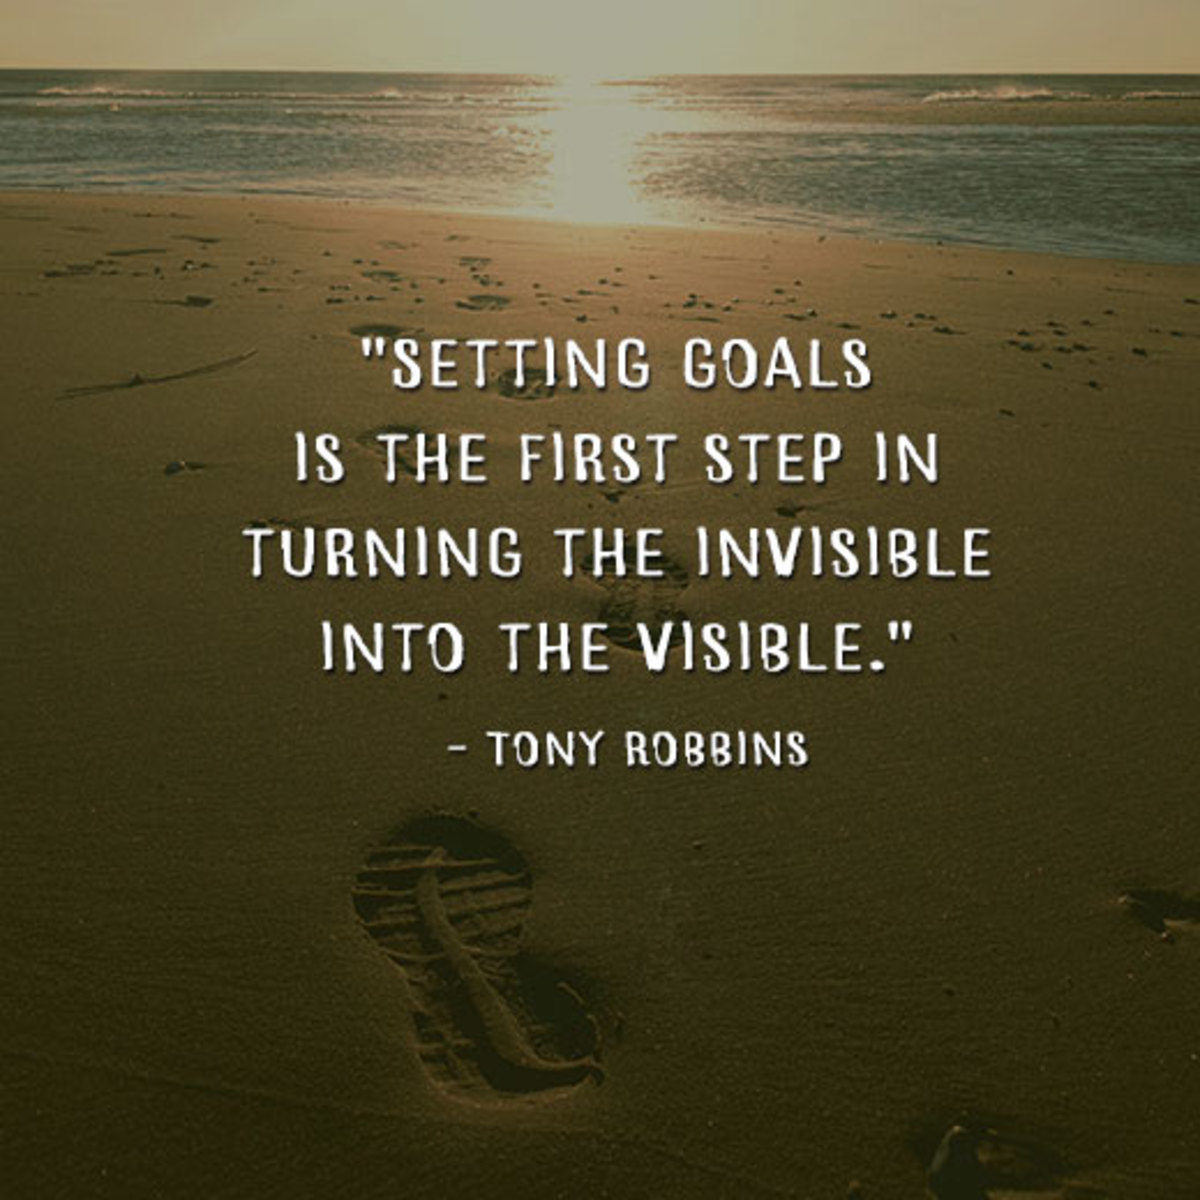 "Setting goals is the first step in turning the invisible into the visible." - Tony Robbins